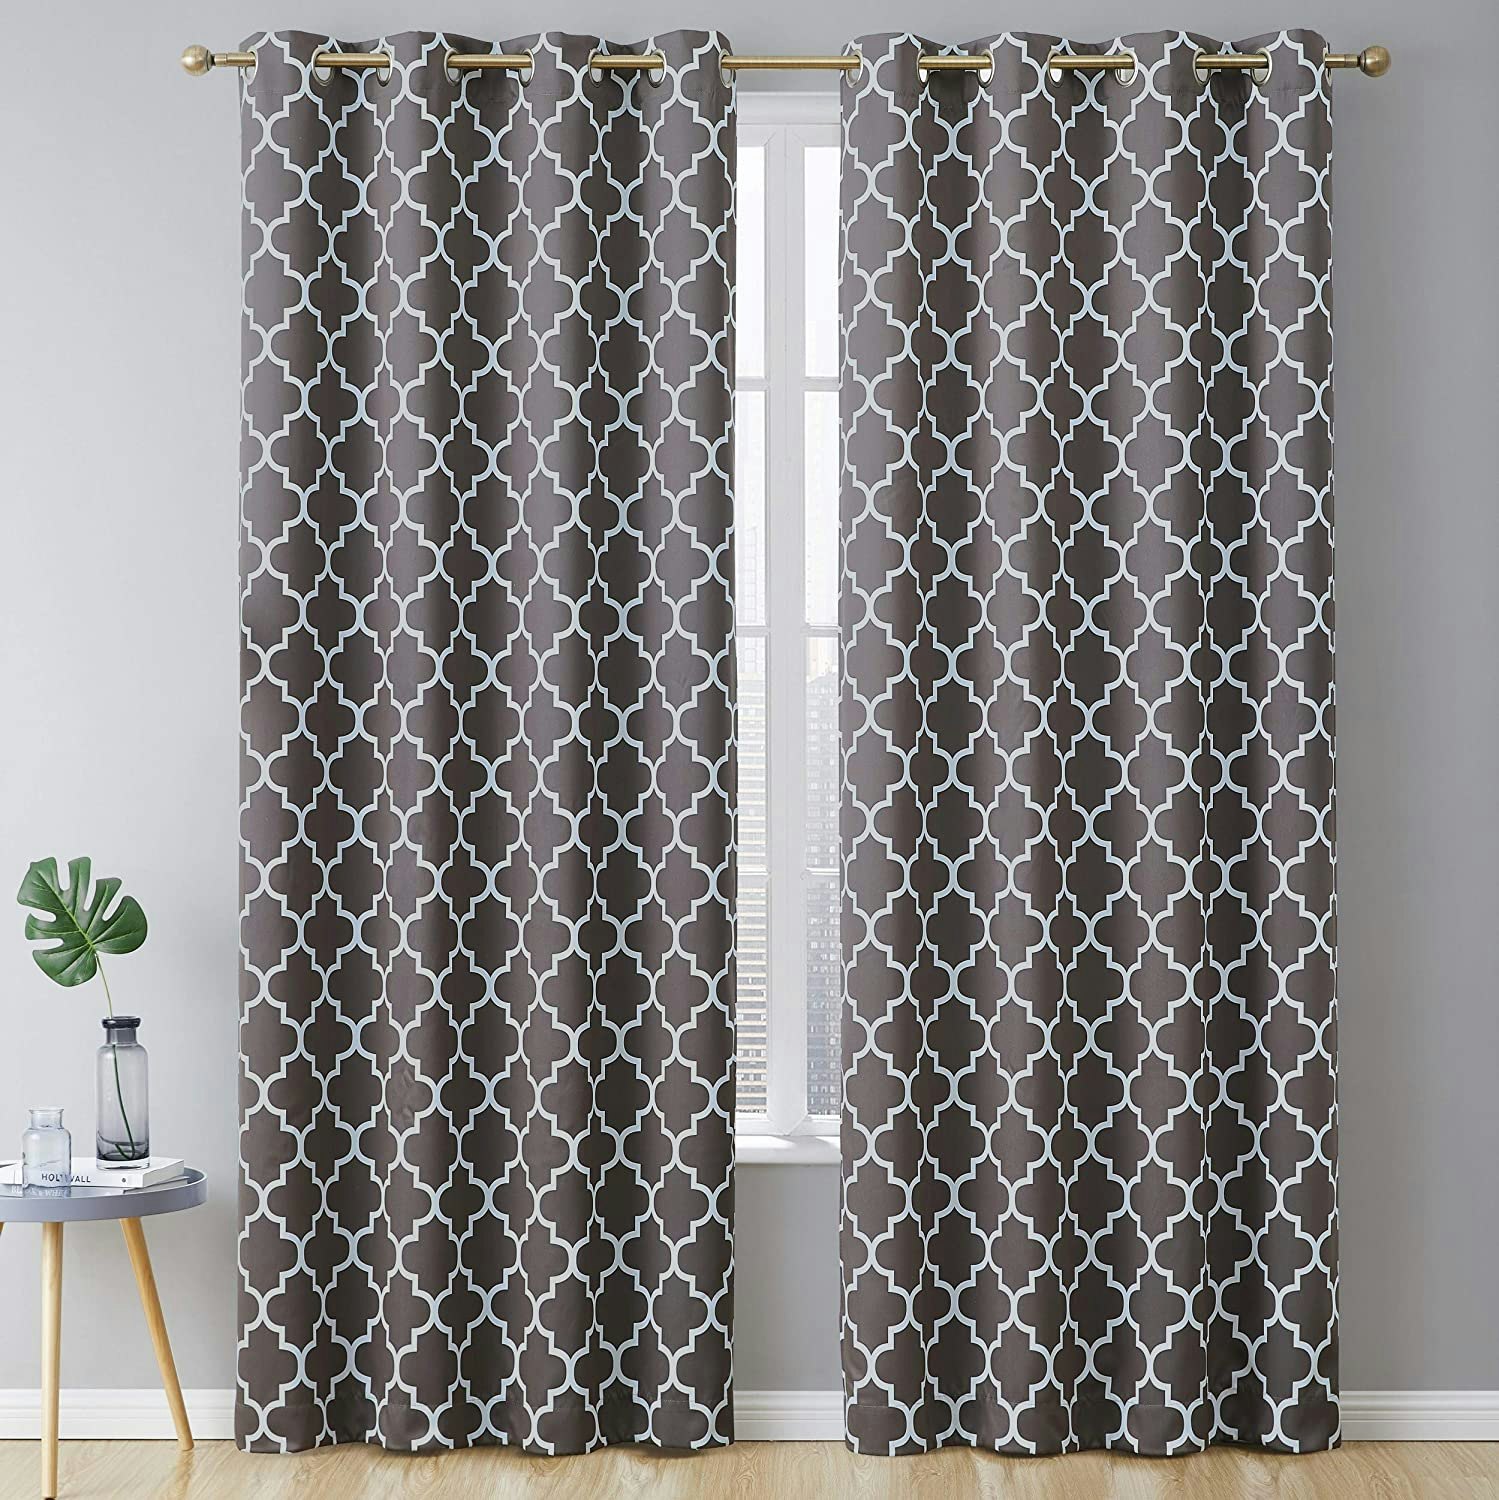 best thermal curtains to keep out heat